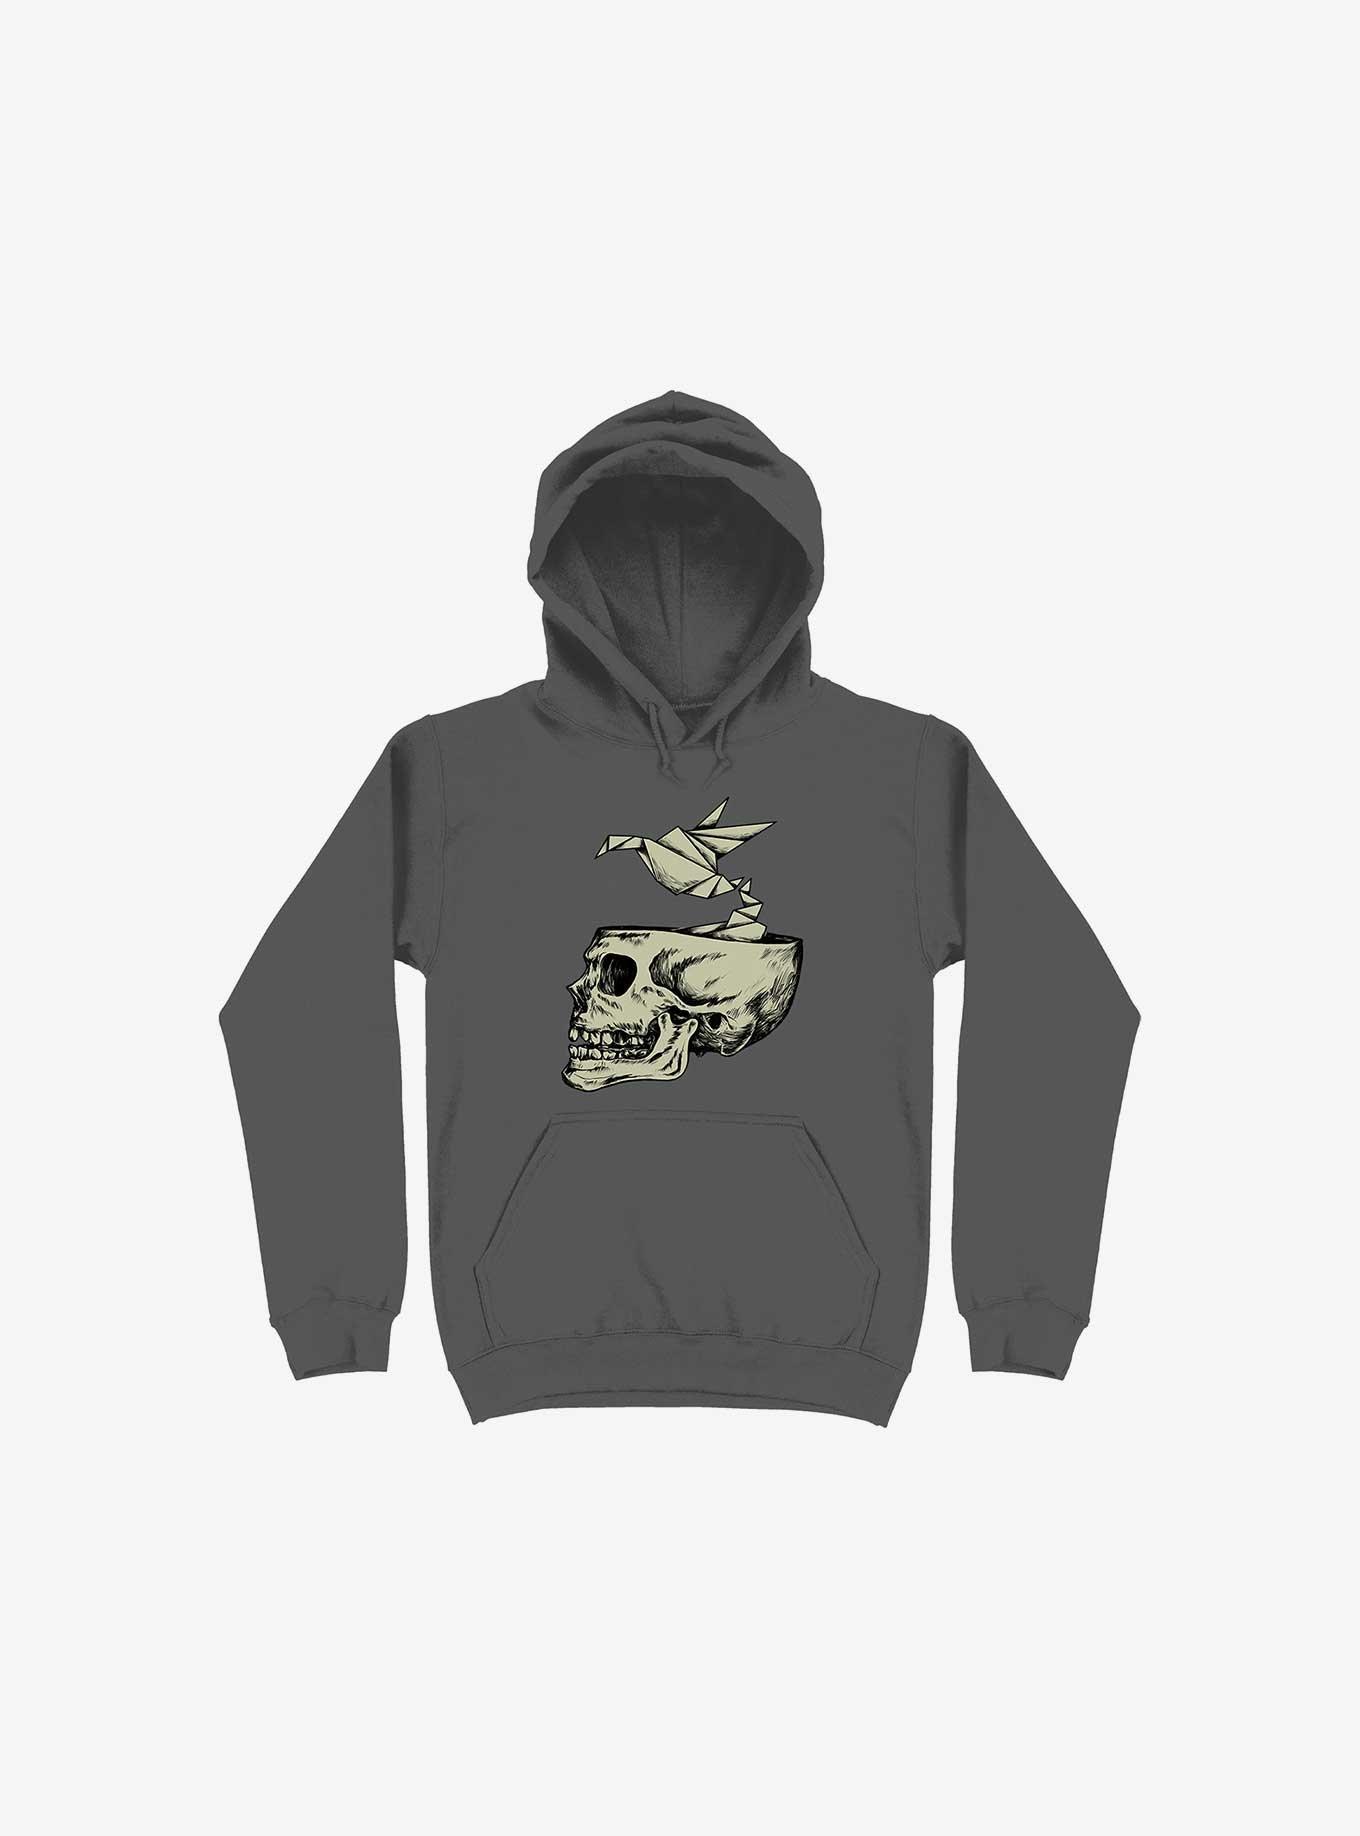 Expand Your Mind Hoodie, , hi-res